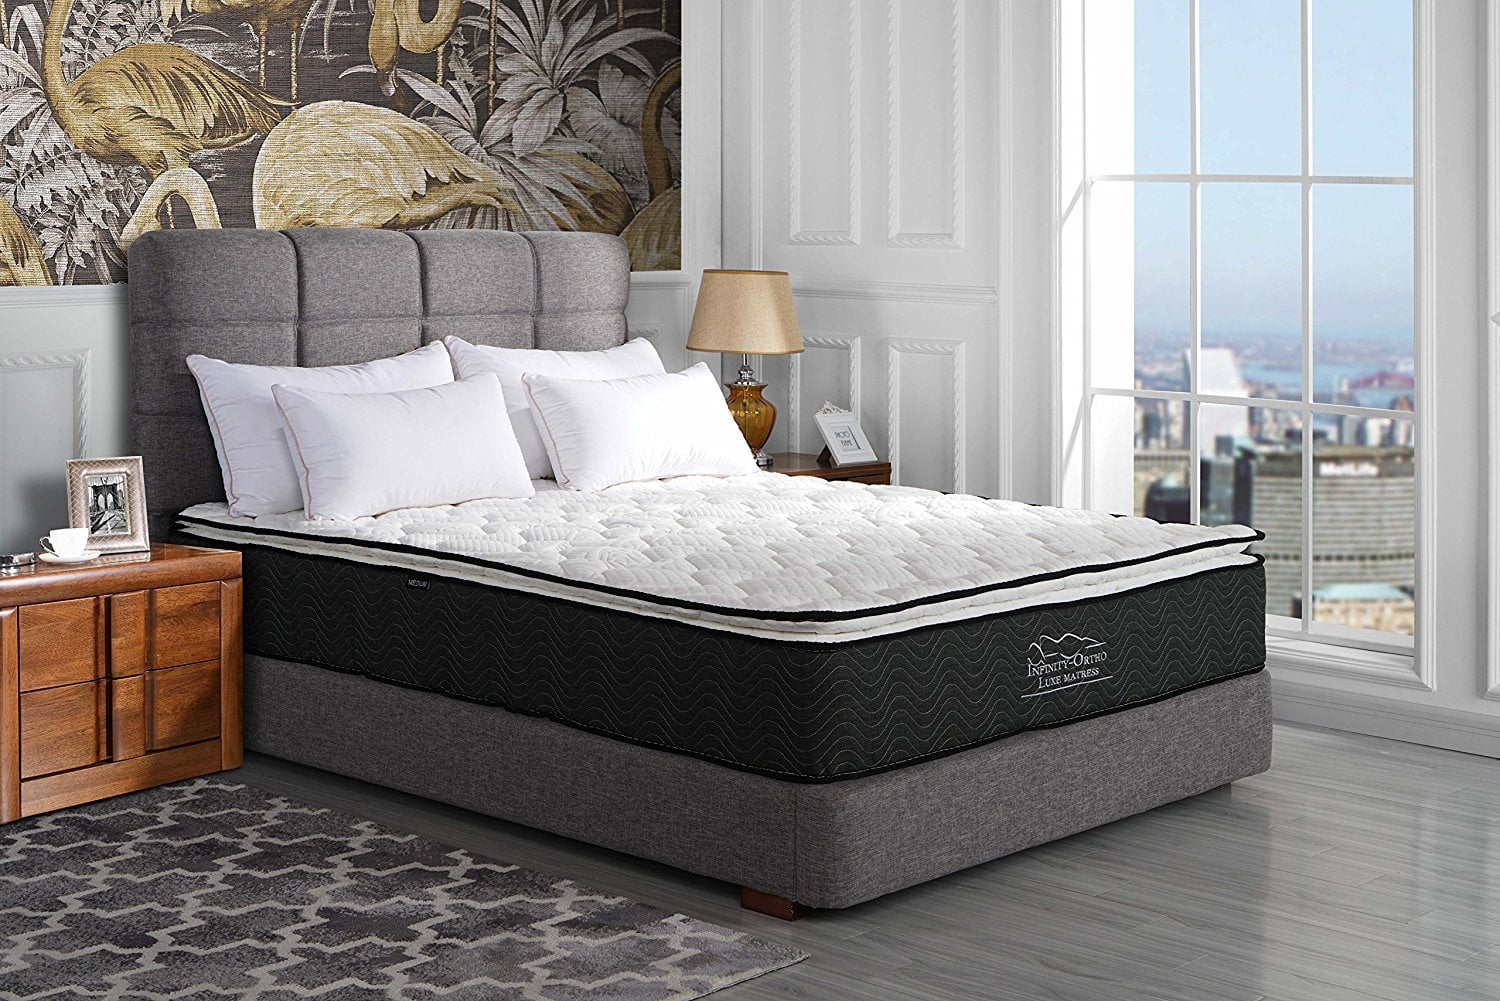 Double Mattress 135x190x27cm 10.6 Inch Double Mattress with Breathable Foam and Pocket Spring for Cool Comfort Sleep Medium Plush Feel Double Mattress 4FT6 Innerspring Hybrid Mattress 